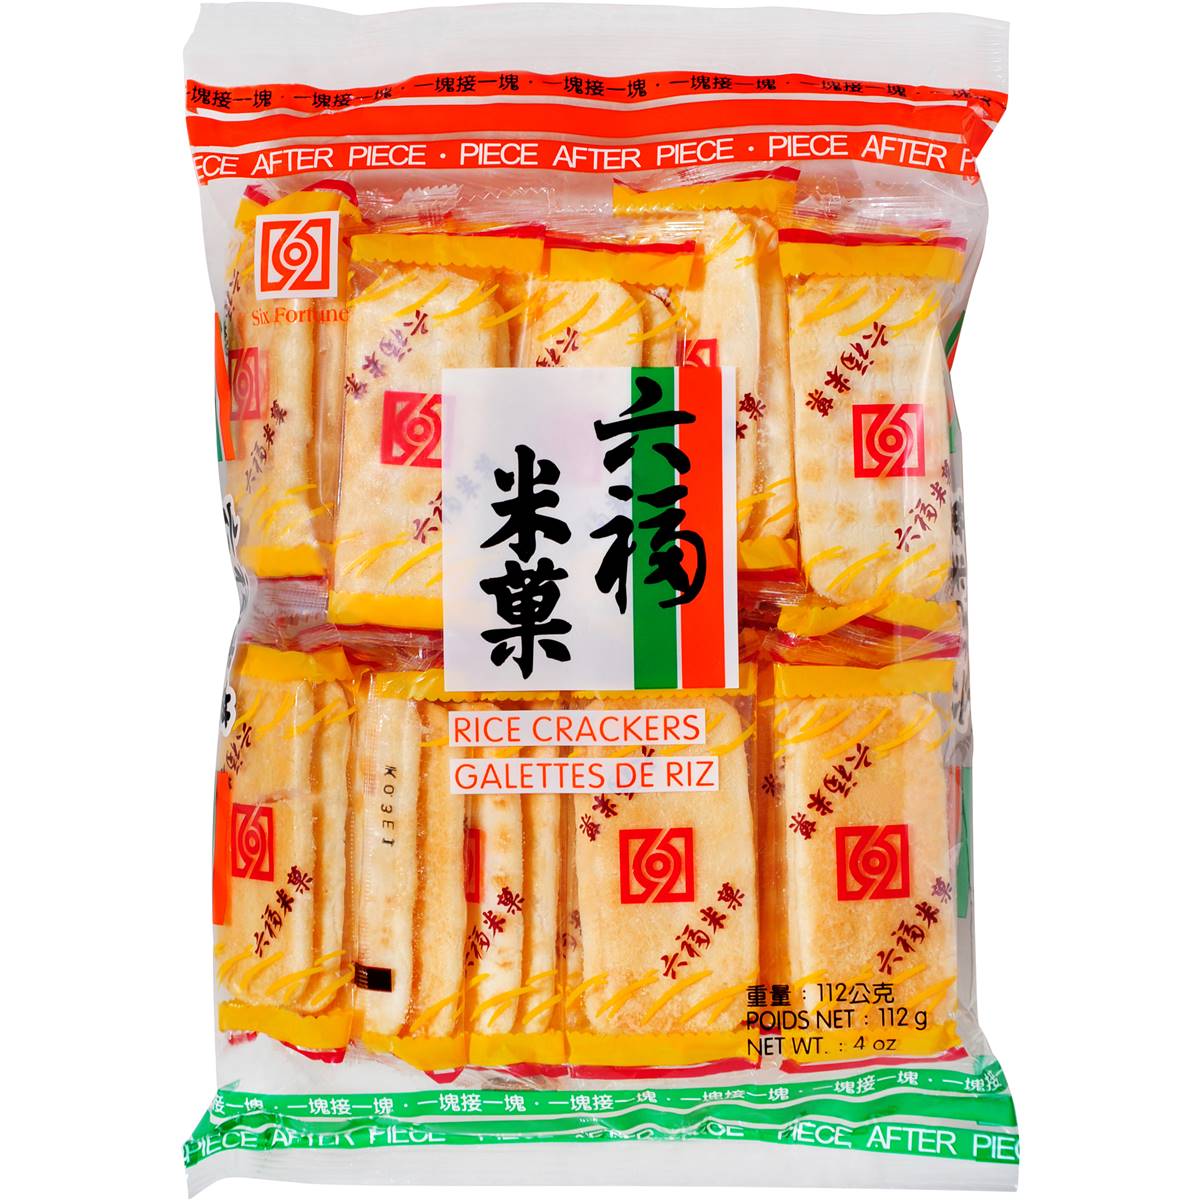 Calories in Six Fortune Snacks Rice Crackers